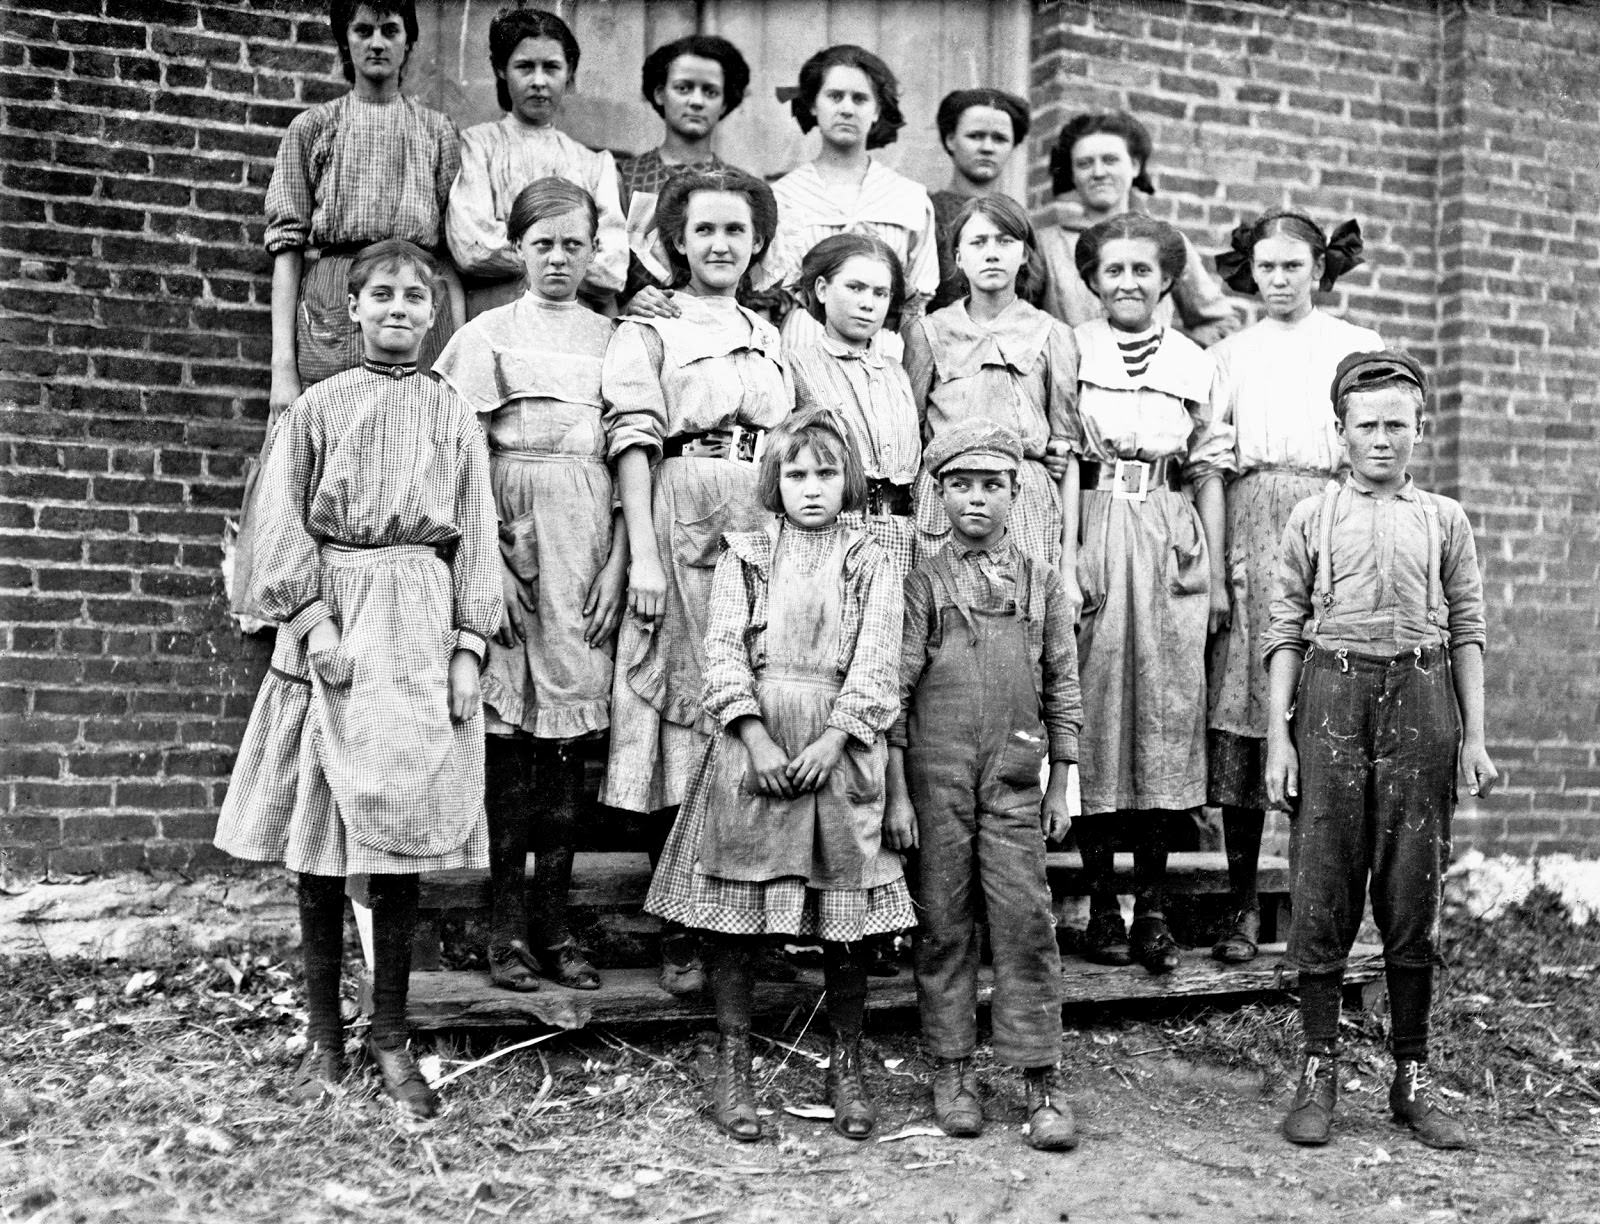 Nope, not a class picture but in fact all the mill workers in Fayettesville, Tennessee, US in 1910. The young girl in the front apparently had trouble remembering her own name.